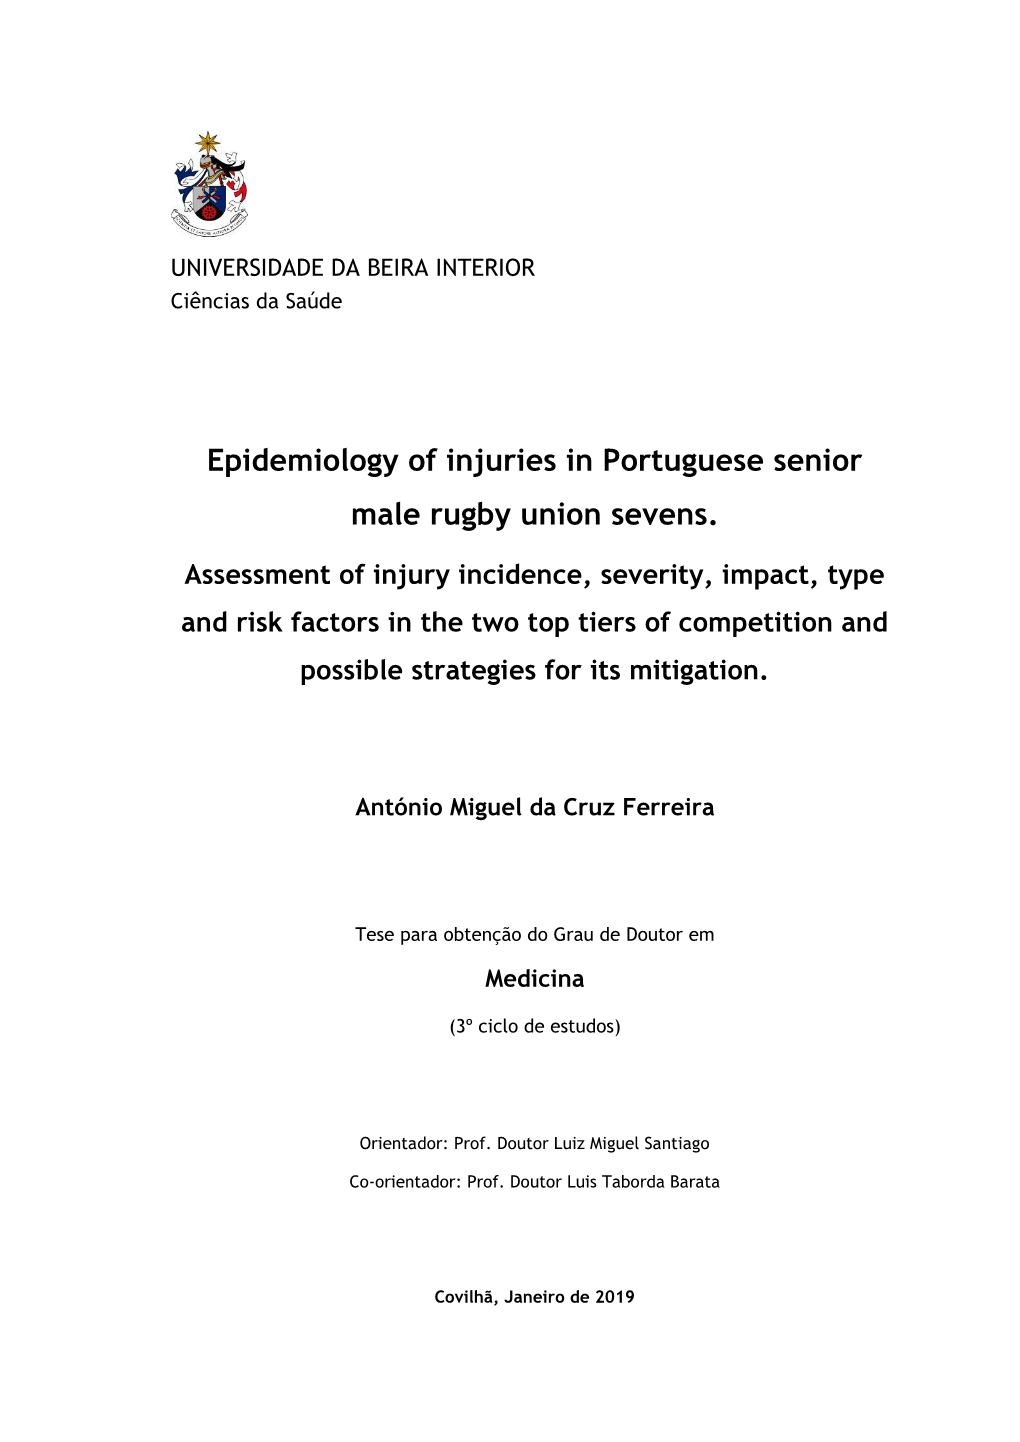 Epidemiology of Injuries in Portuguese Senior Male Rugby Union Sevens